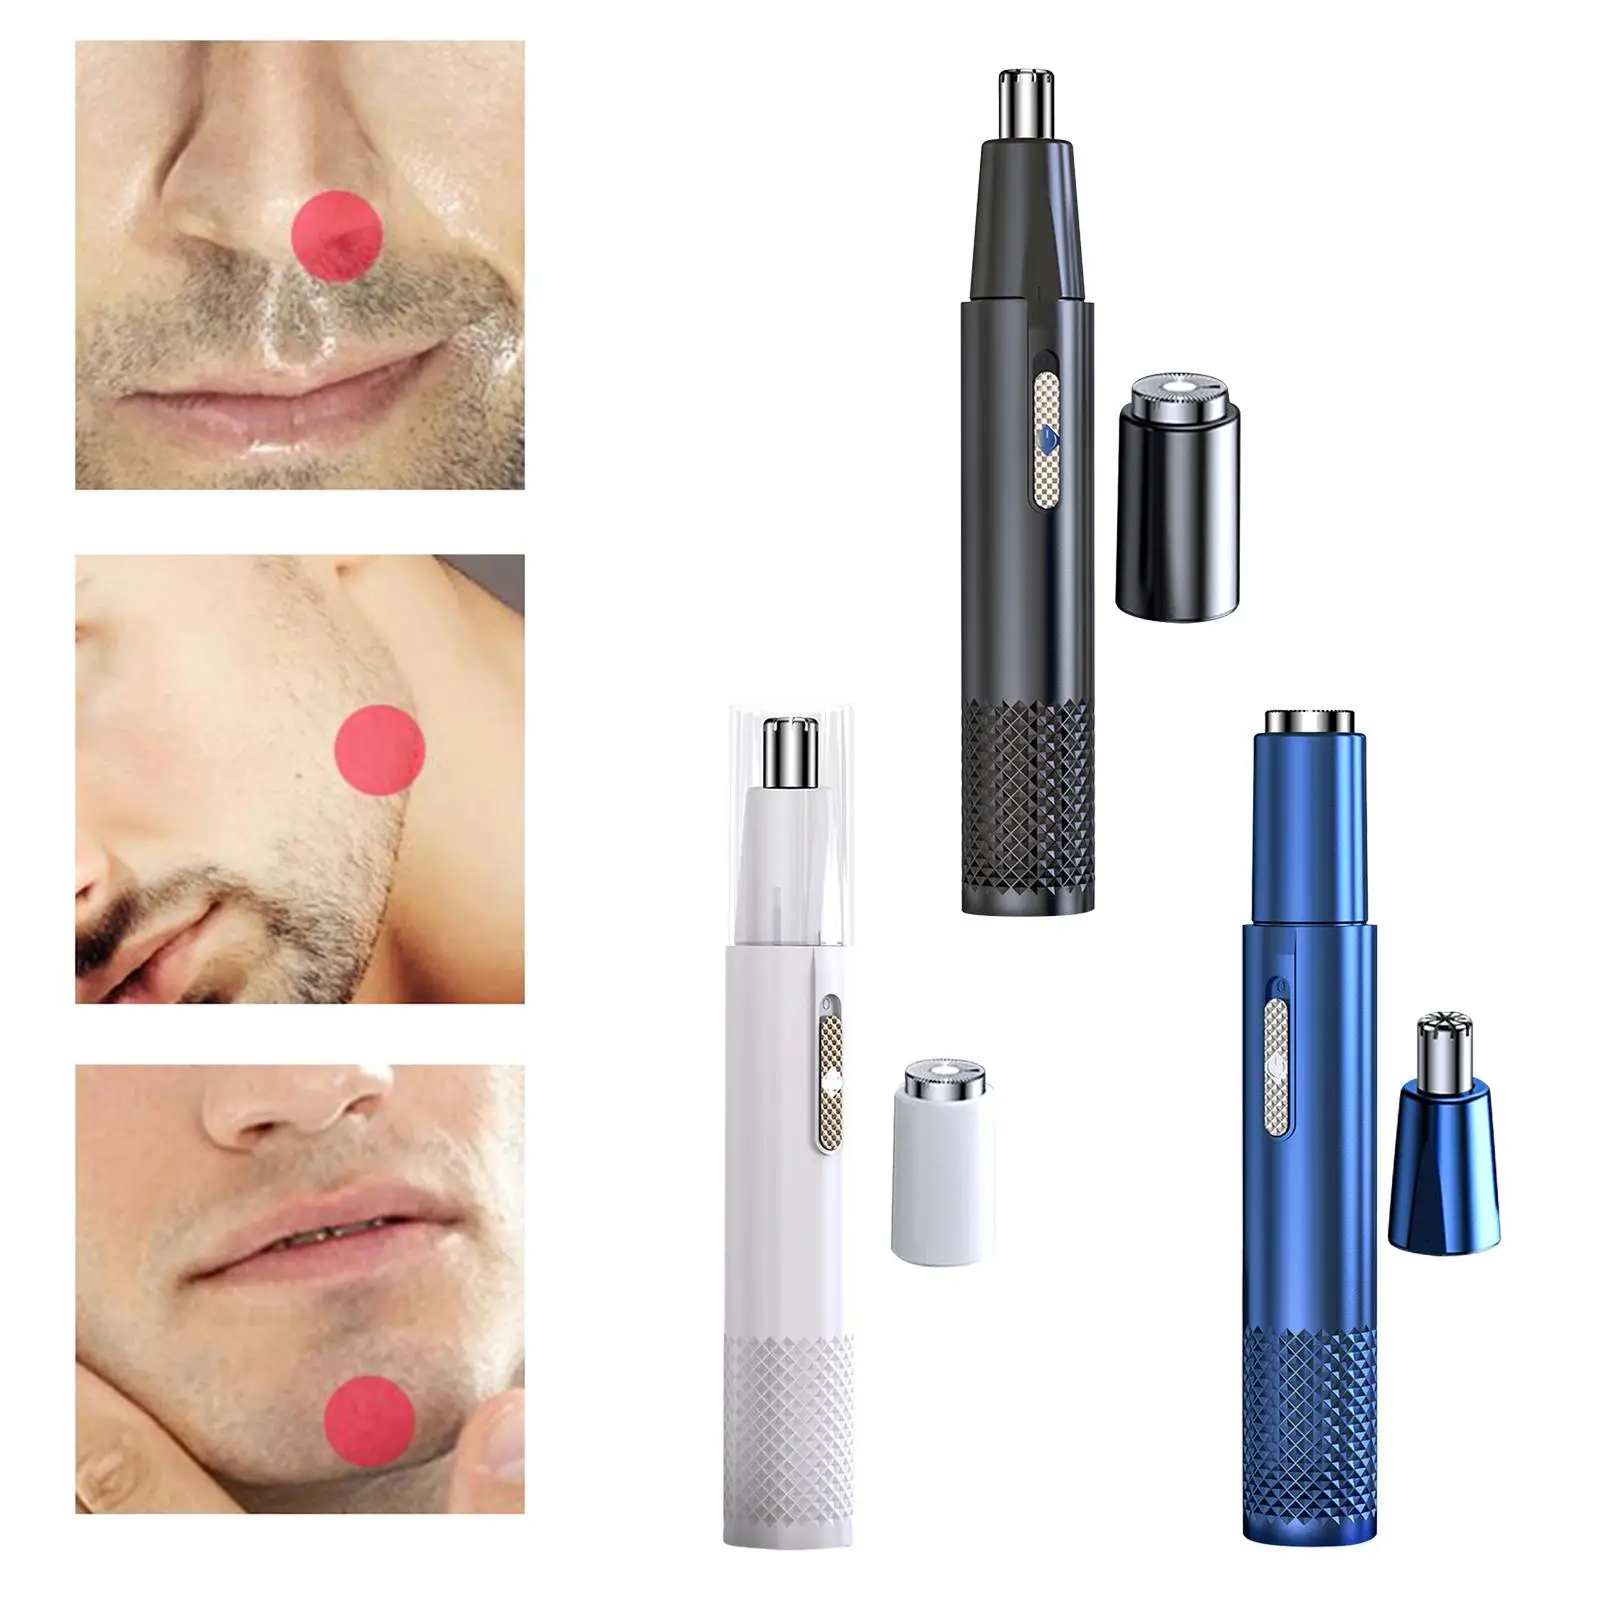 Nose and Ear Hair Trimmer Rechargeable Portable for Nose Hair Shaver